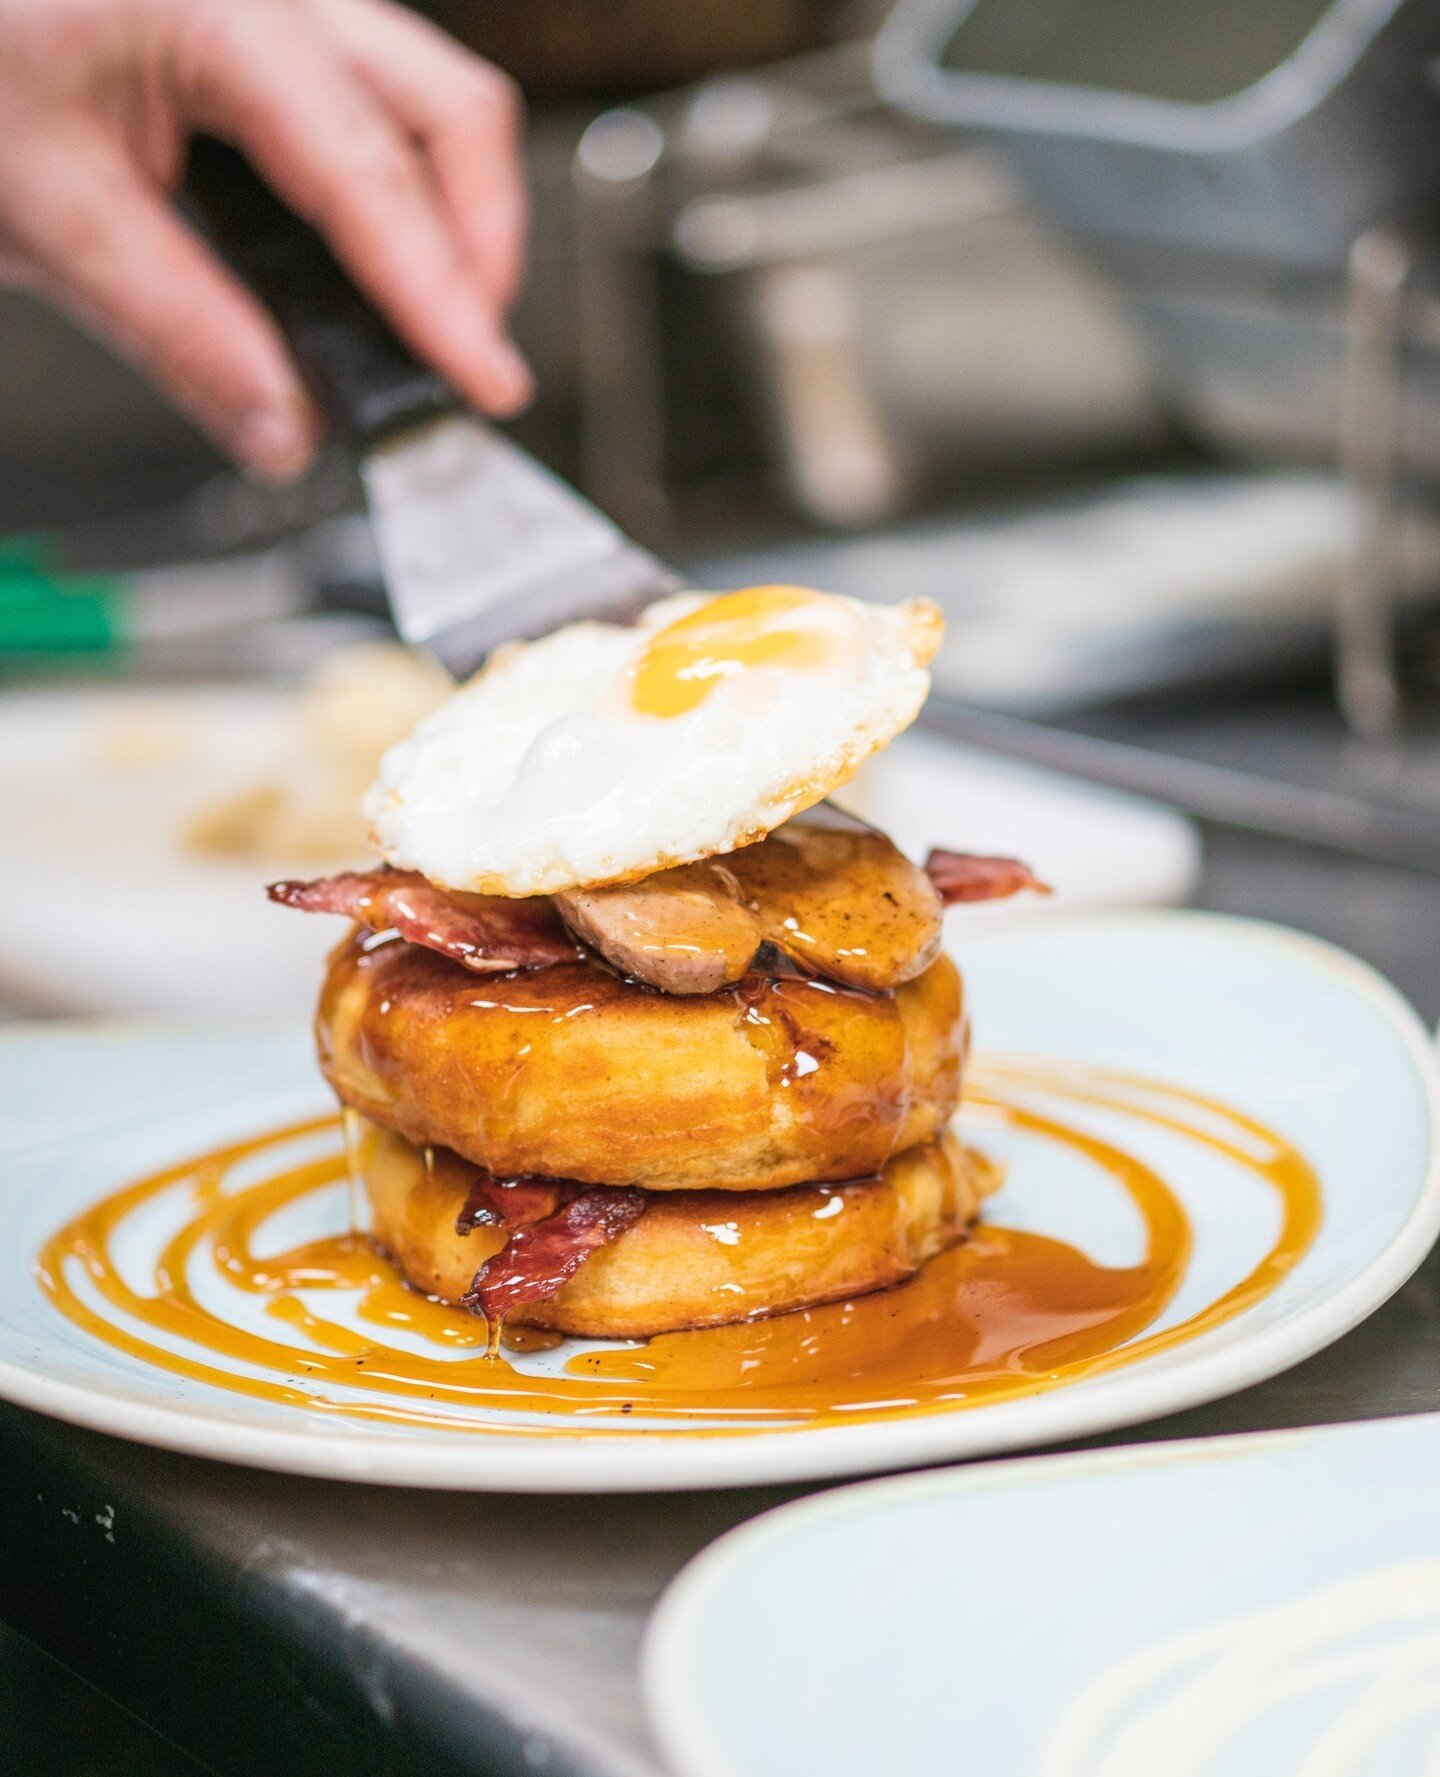 No need to wait for the weekend...our breakfast pancakes are always a good idea! 🥞